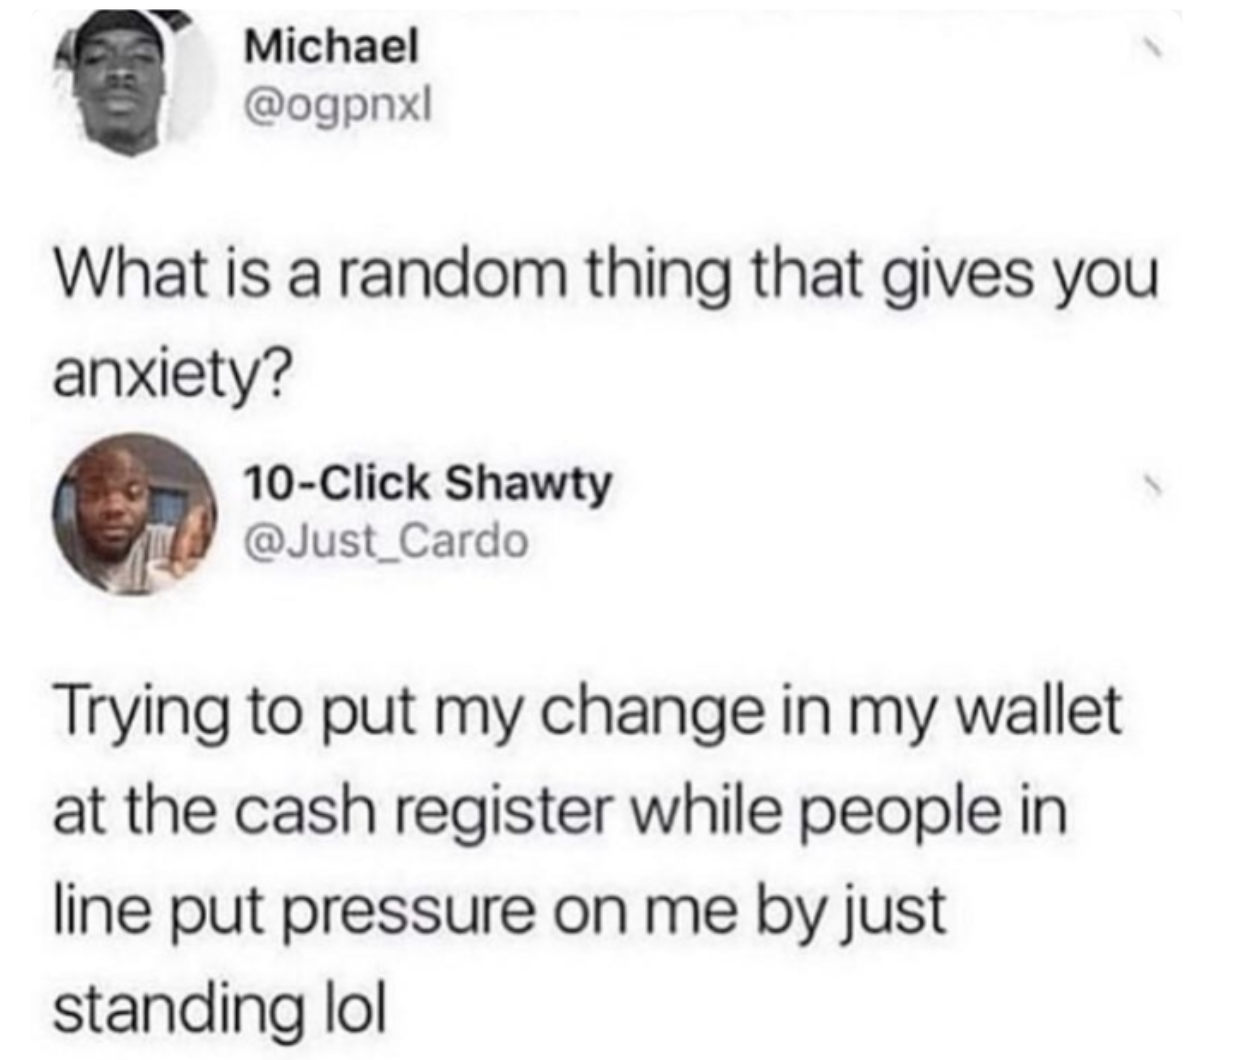 person commenting that putting change in his wallet causes anxiety